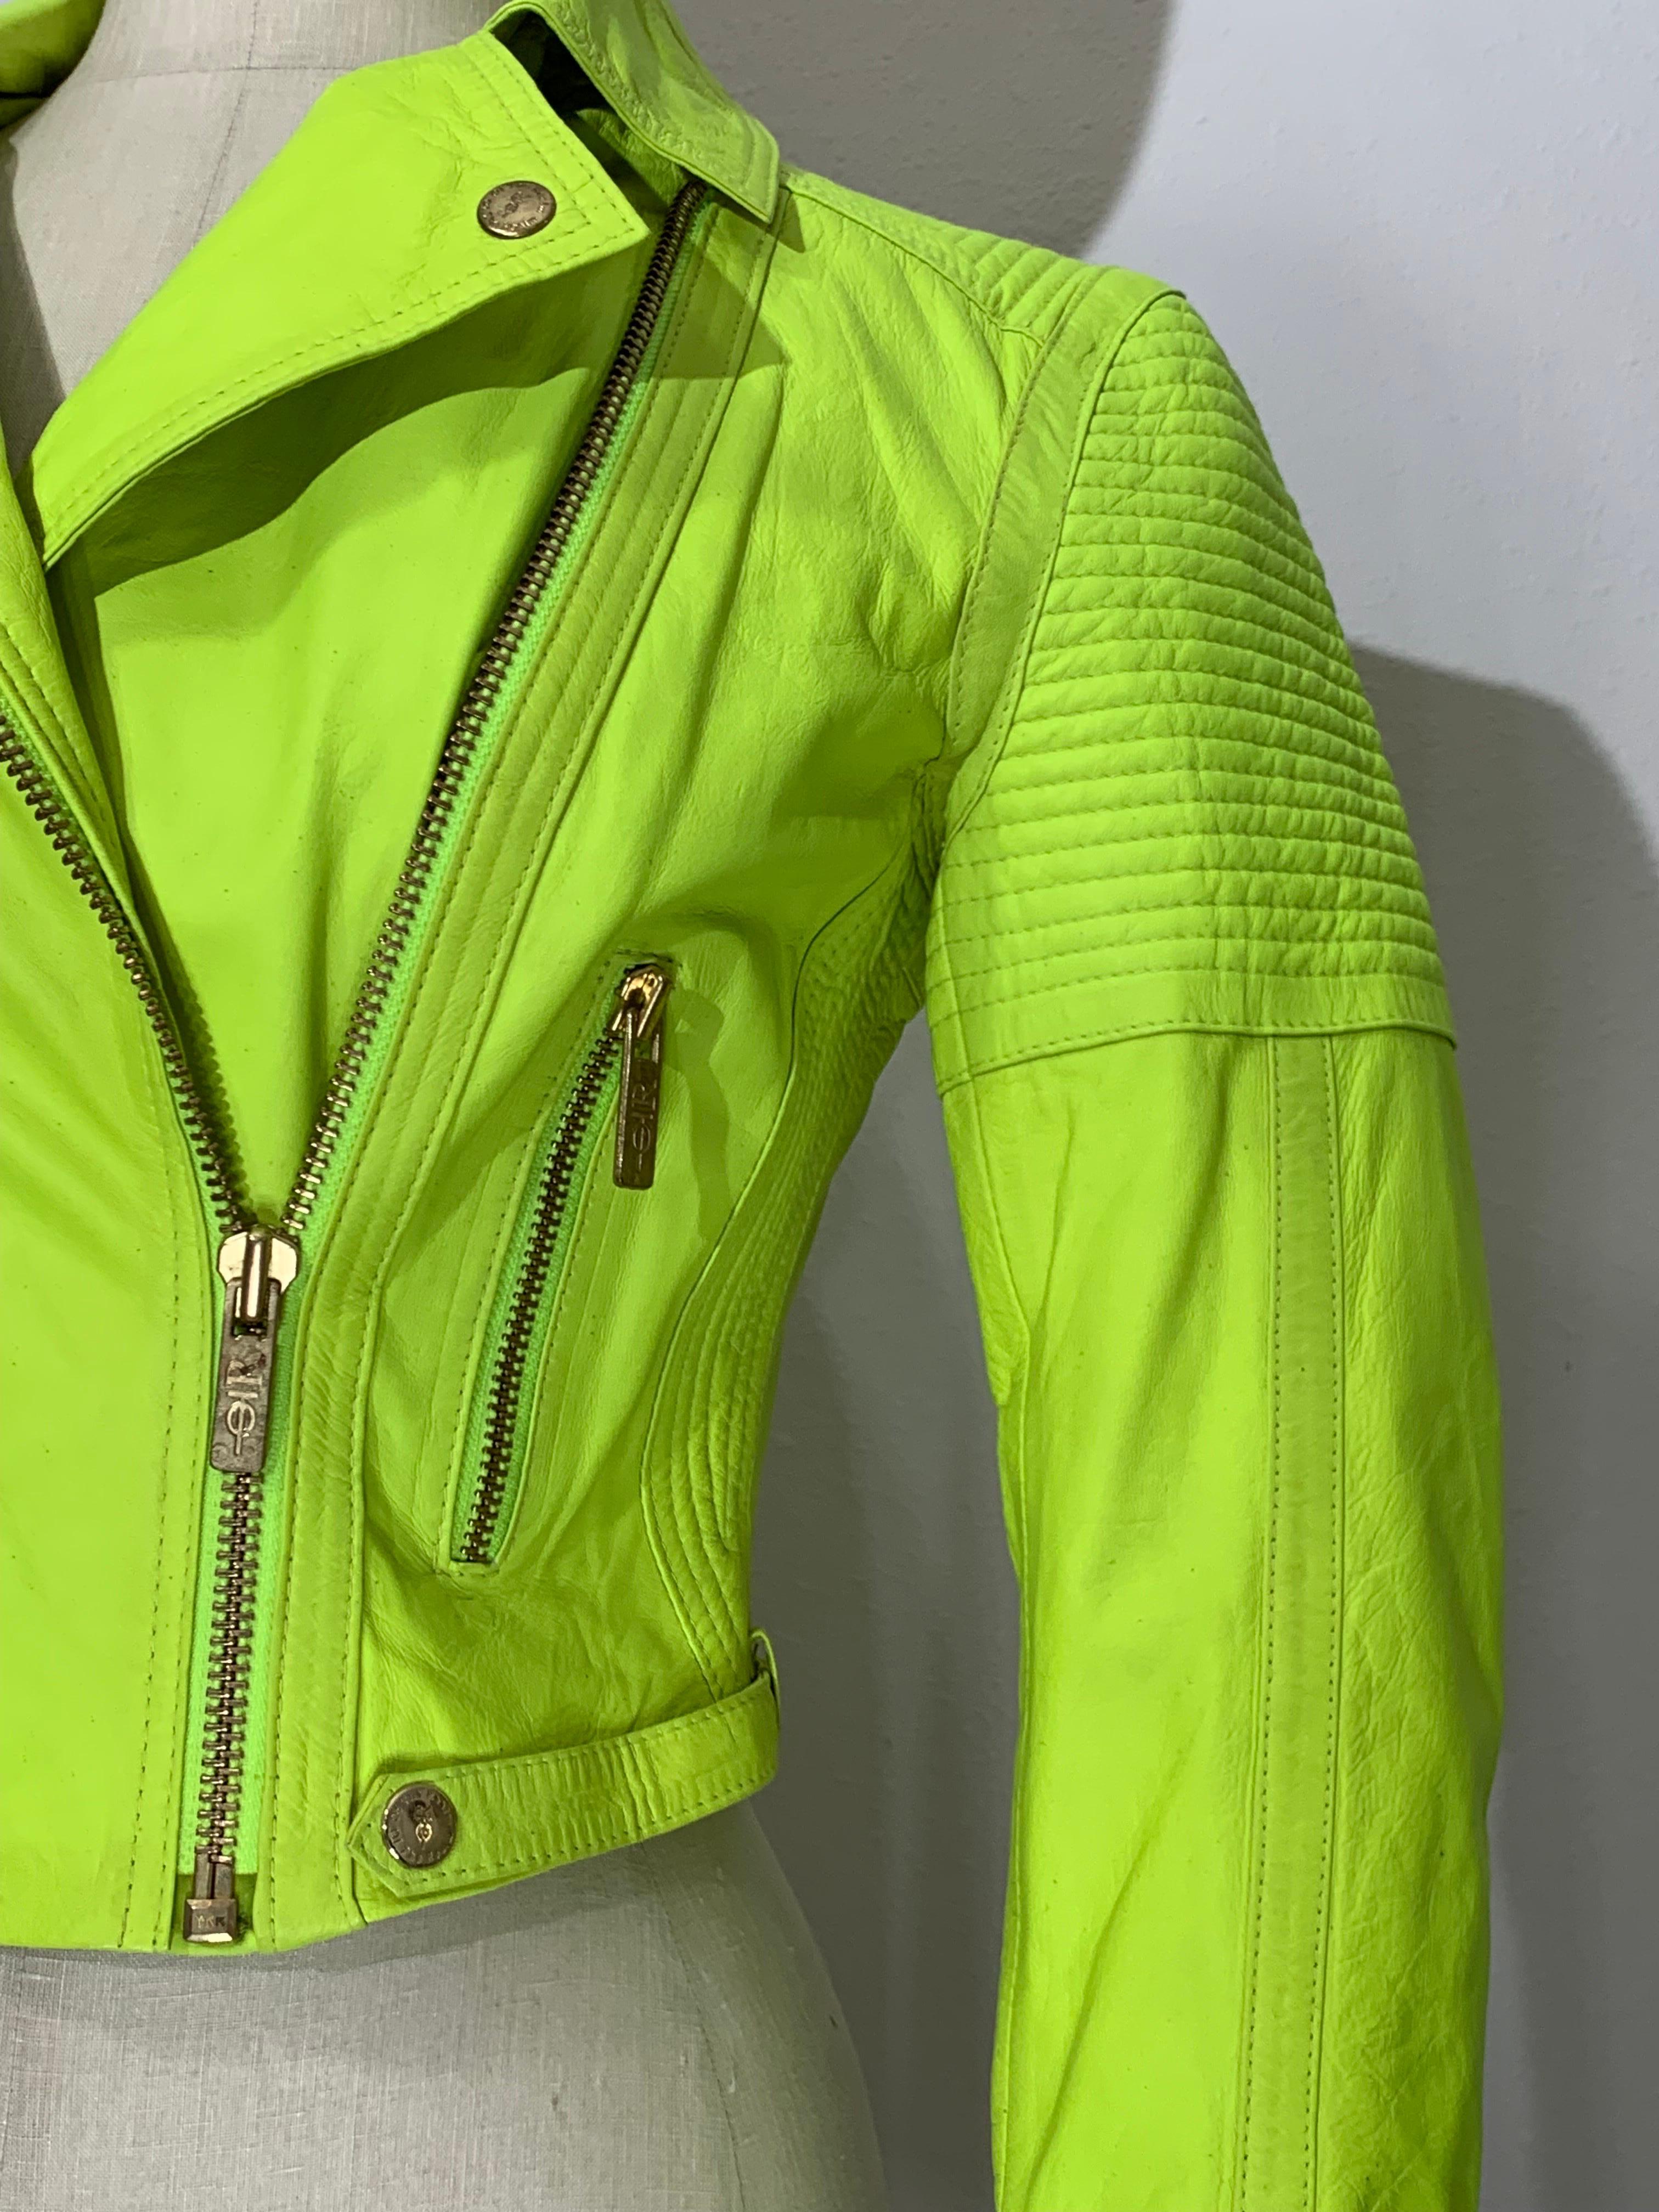 Women's Neon Green Leather Cropped Motorcycle-Style Jacket w Quilted Shoulders & Zippers For Sale